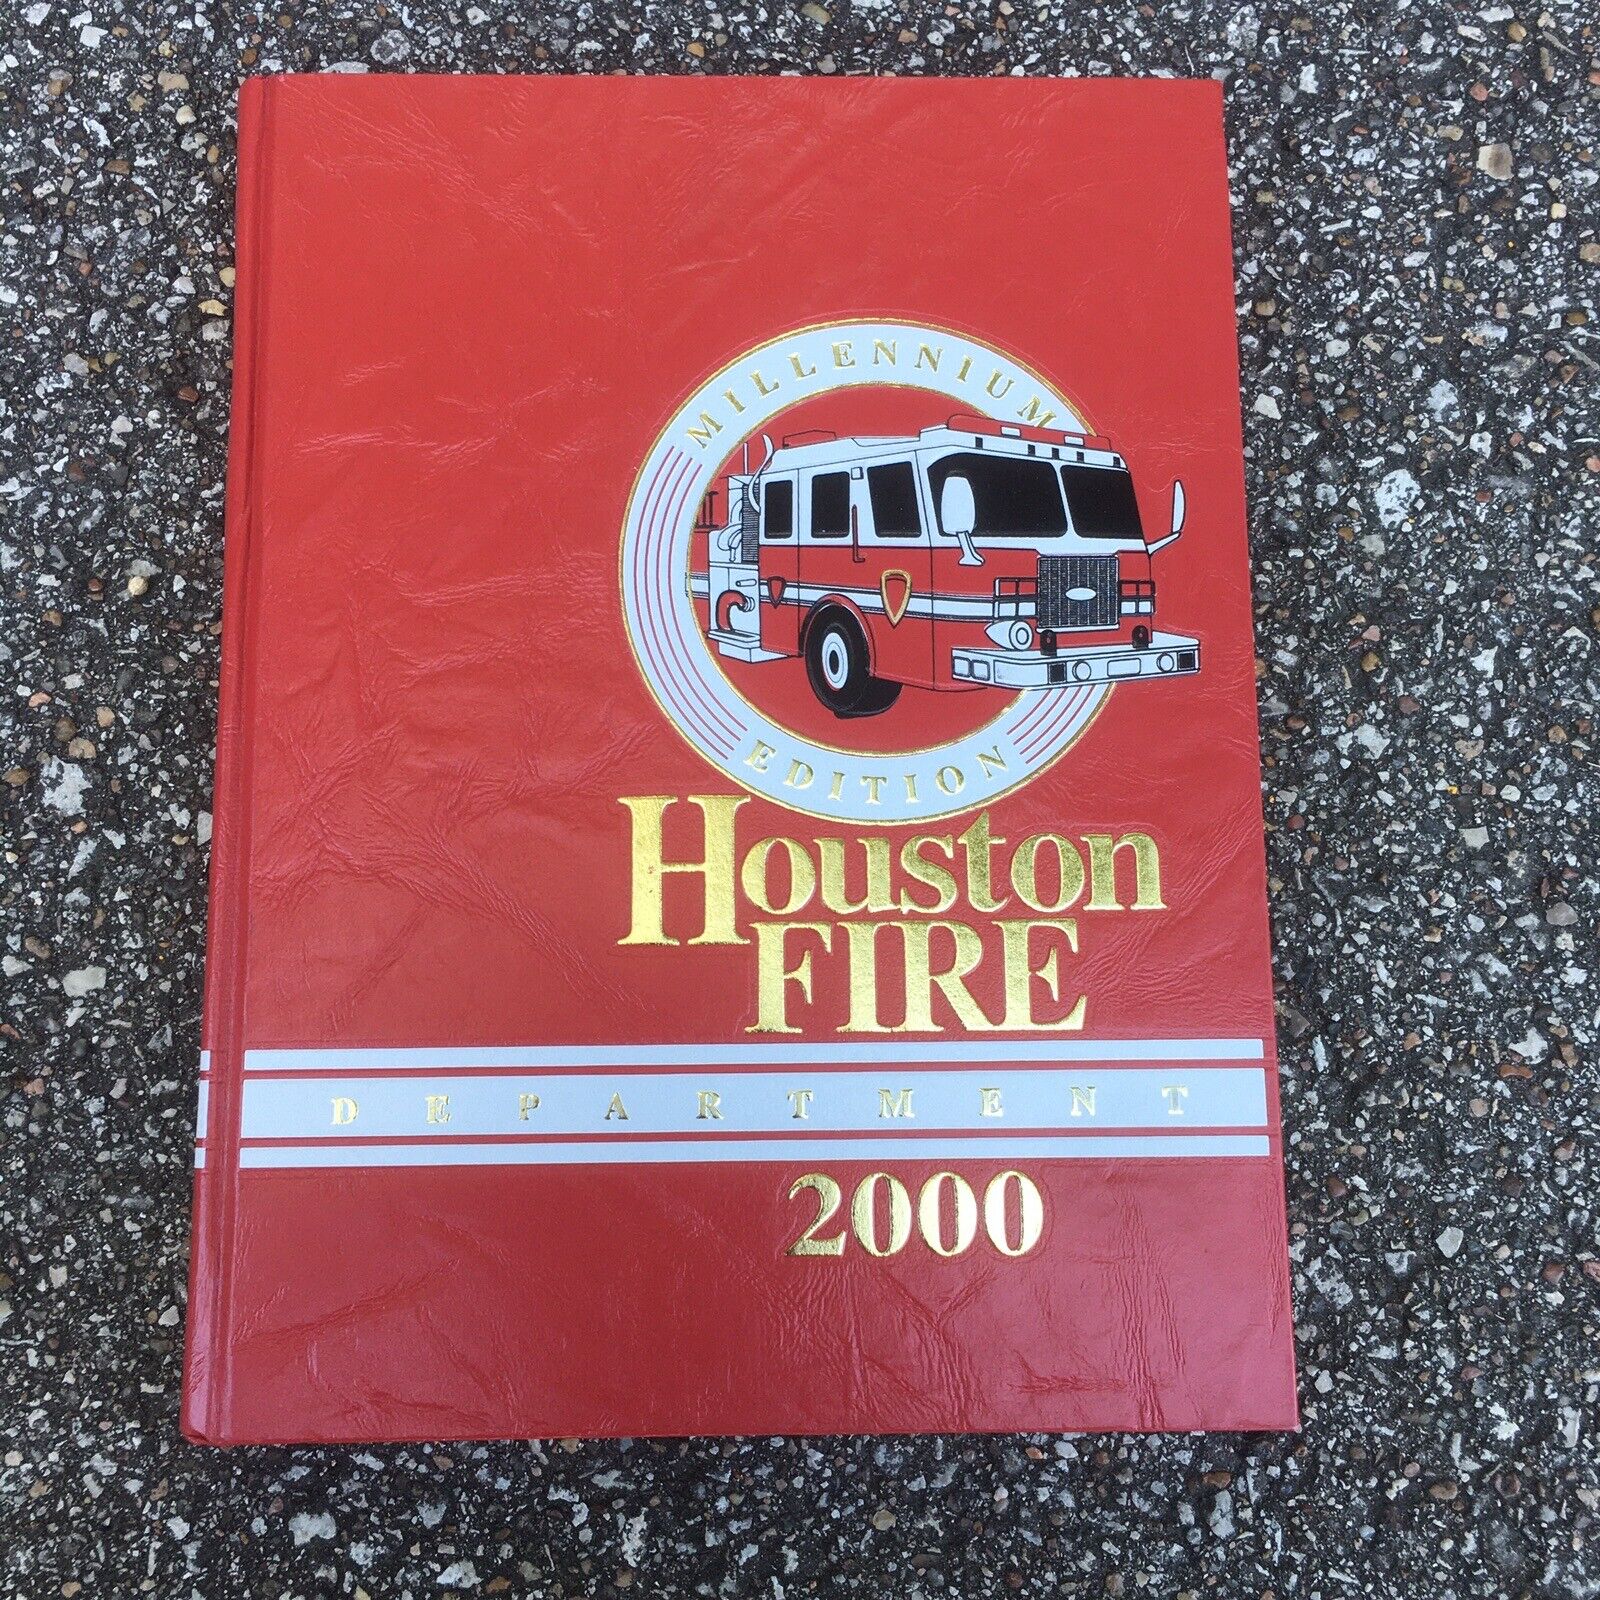 Houston Fire Department 2000 Yearbook TX Texas Firefighter History Book